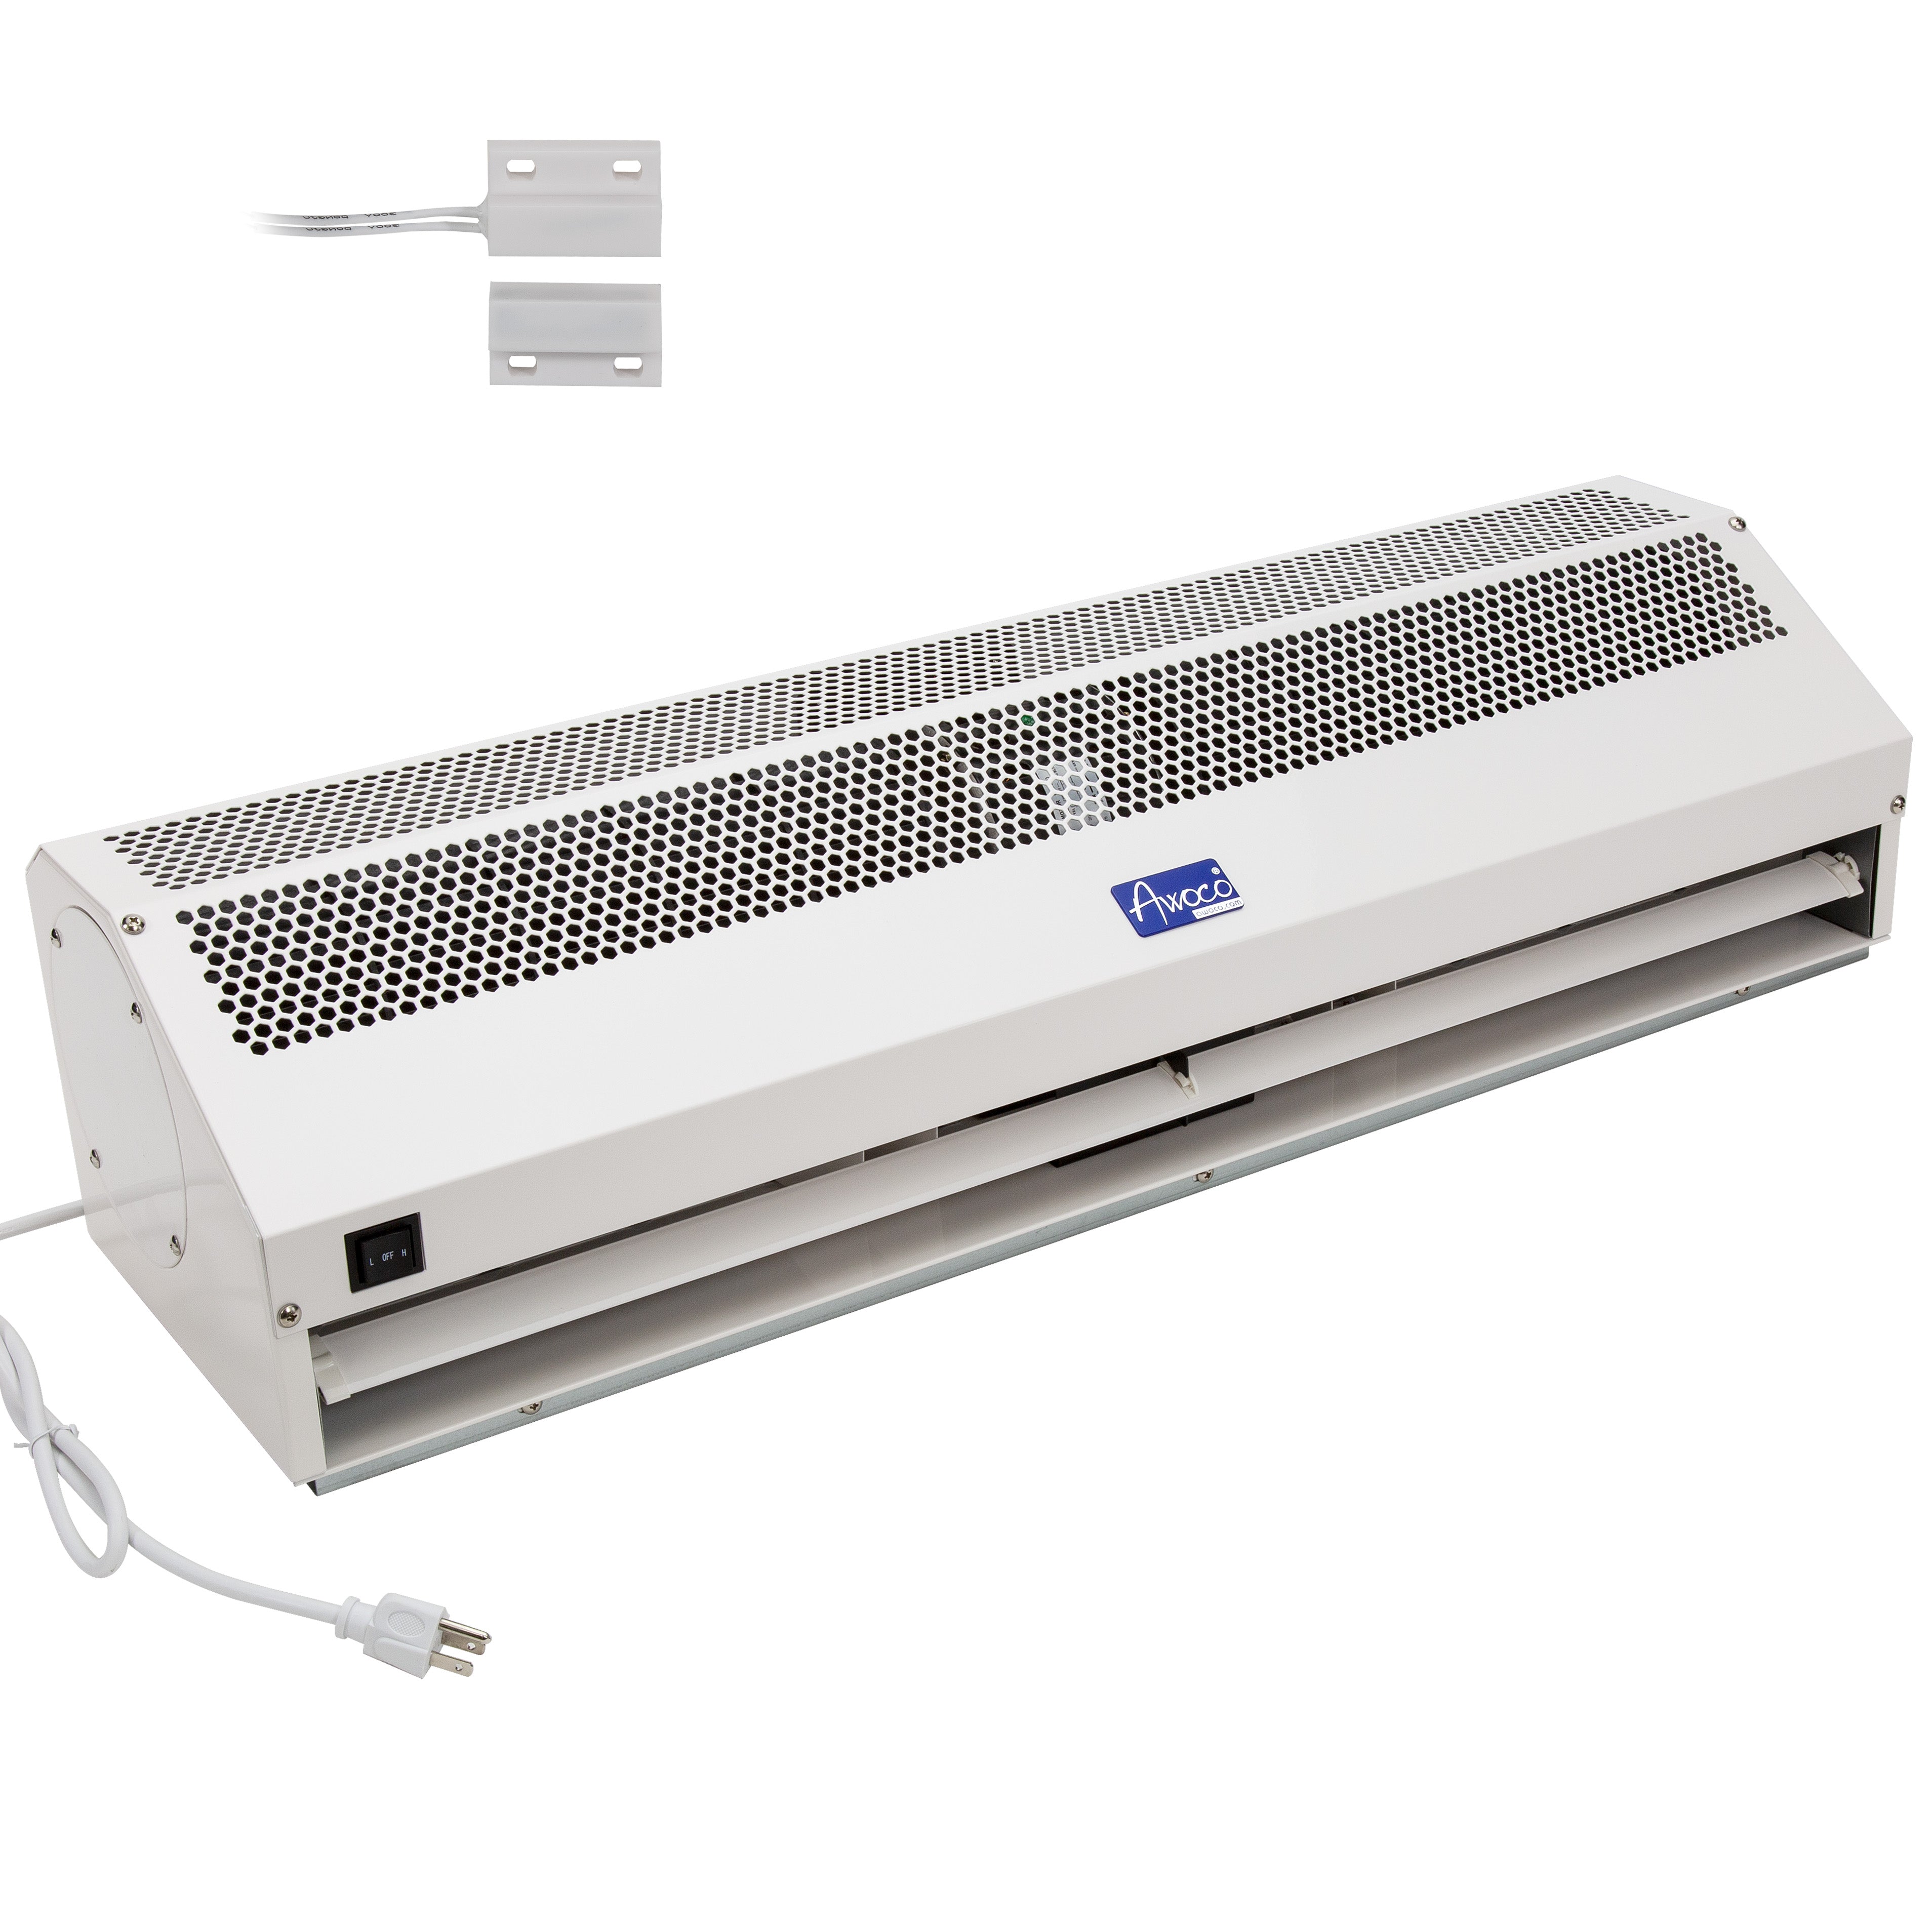 Awoco 48" Super Power 1 Speed 1700 CFM Commercial Indoor Air Curtain, 120V Unheated, ETL & UL Certified to Meet NSF 37 Food Service Standard